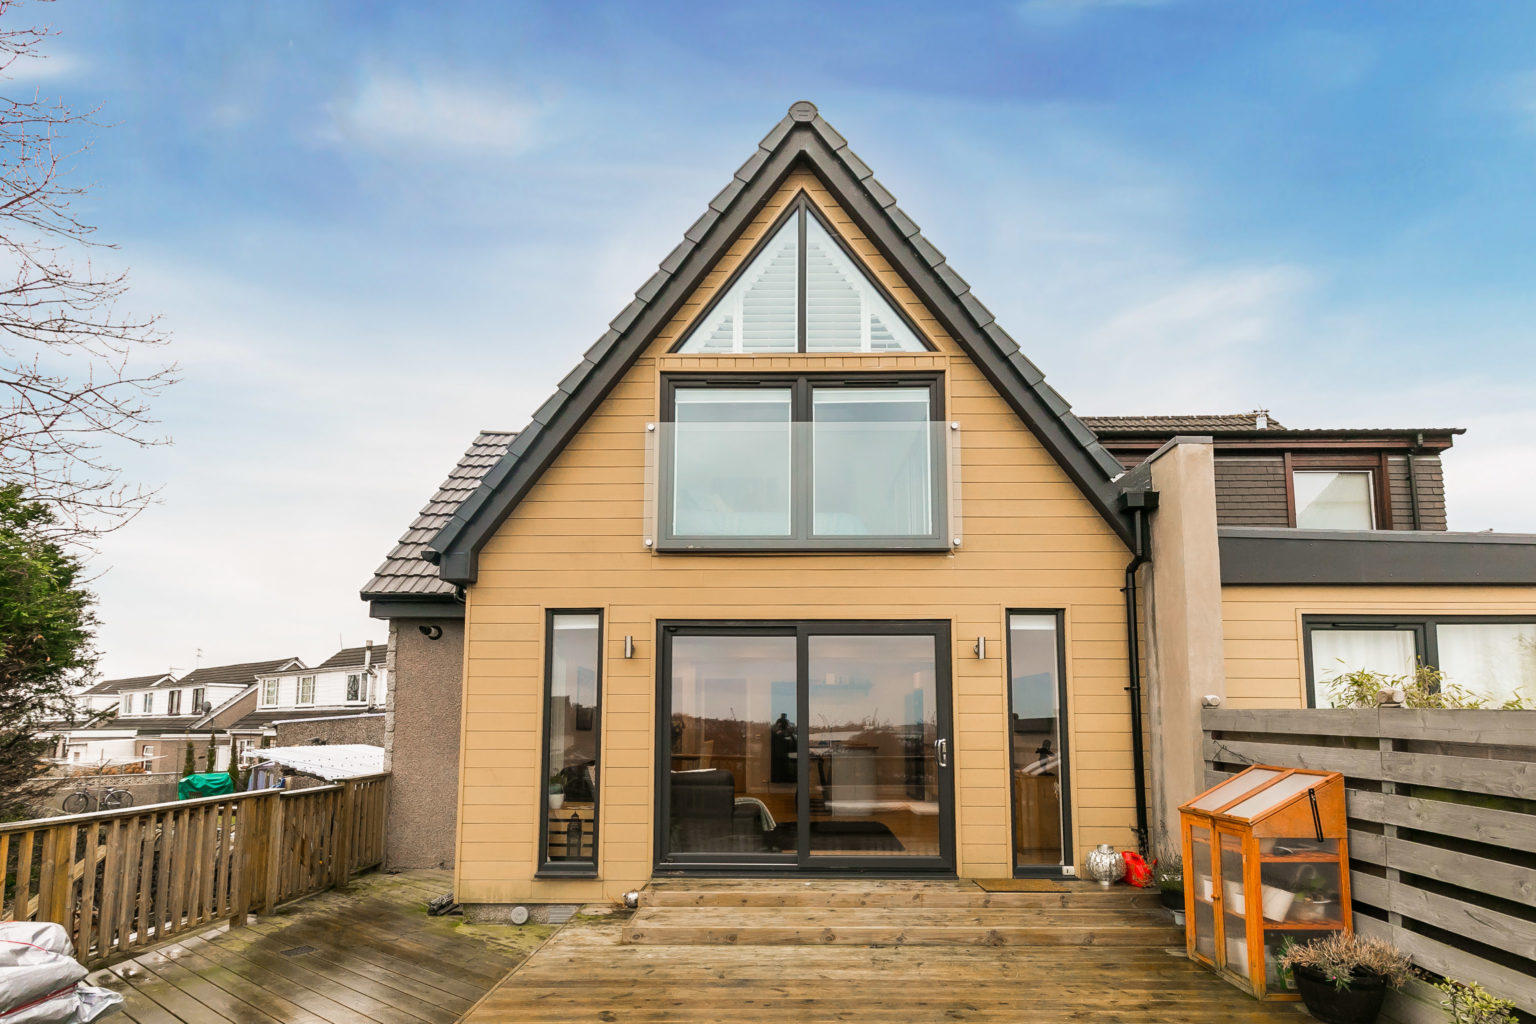 This Aberdeen home has epic city views...